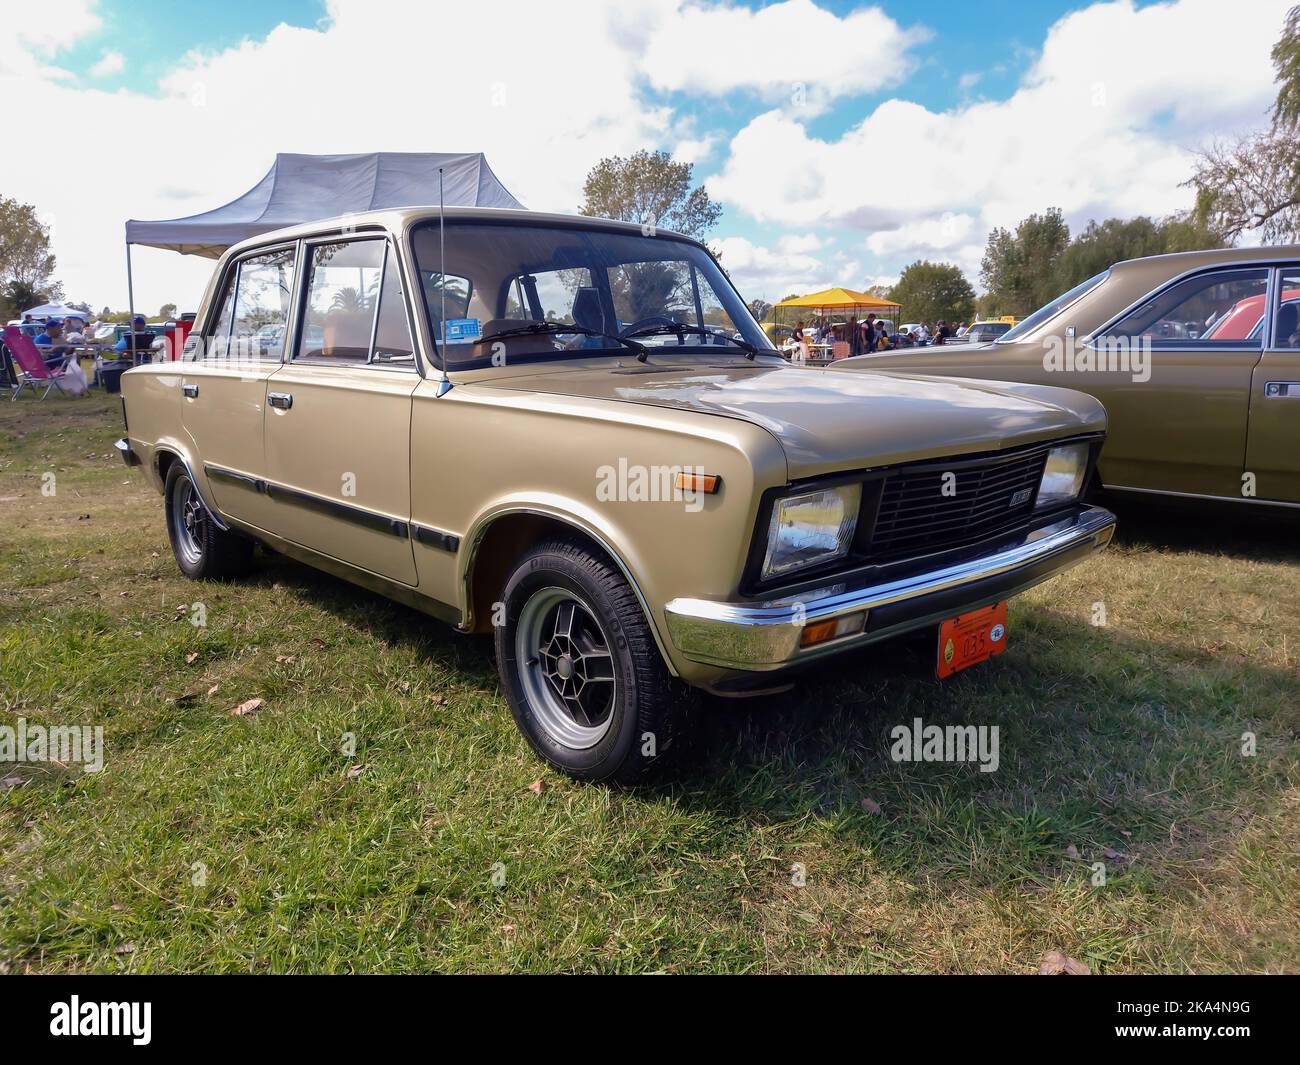 Old beige Fiat 125 Mirafiori four door sedan 1980 in the countryside. Sunny day. Nature, grass, trees. Classic car show. Stock Photo